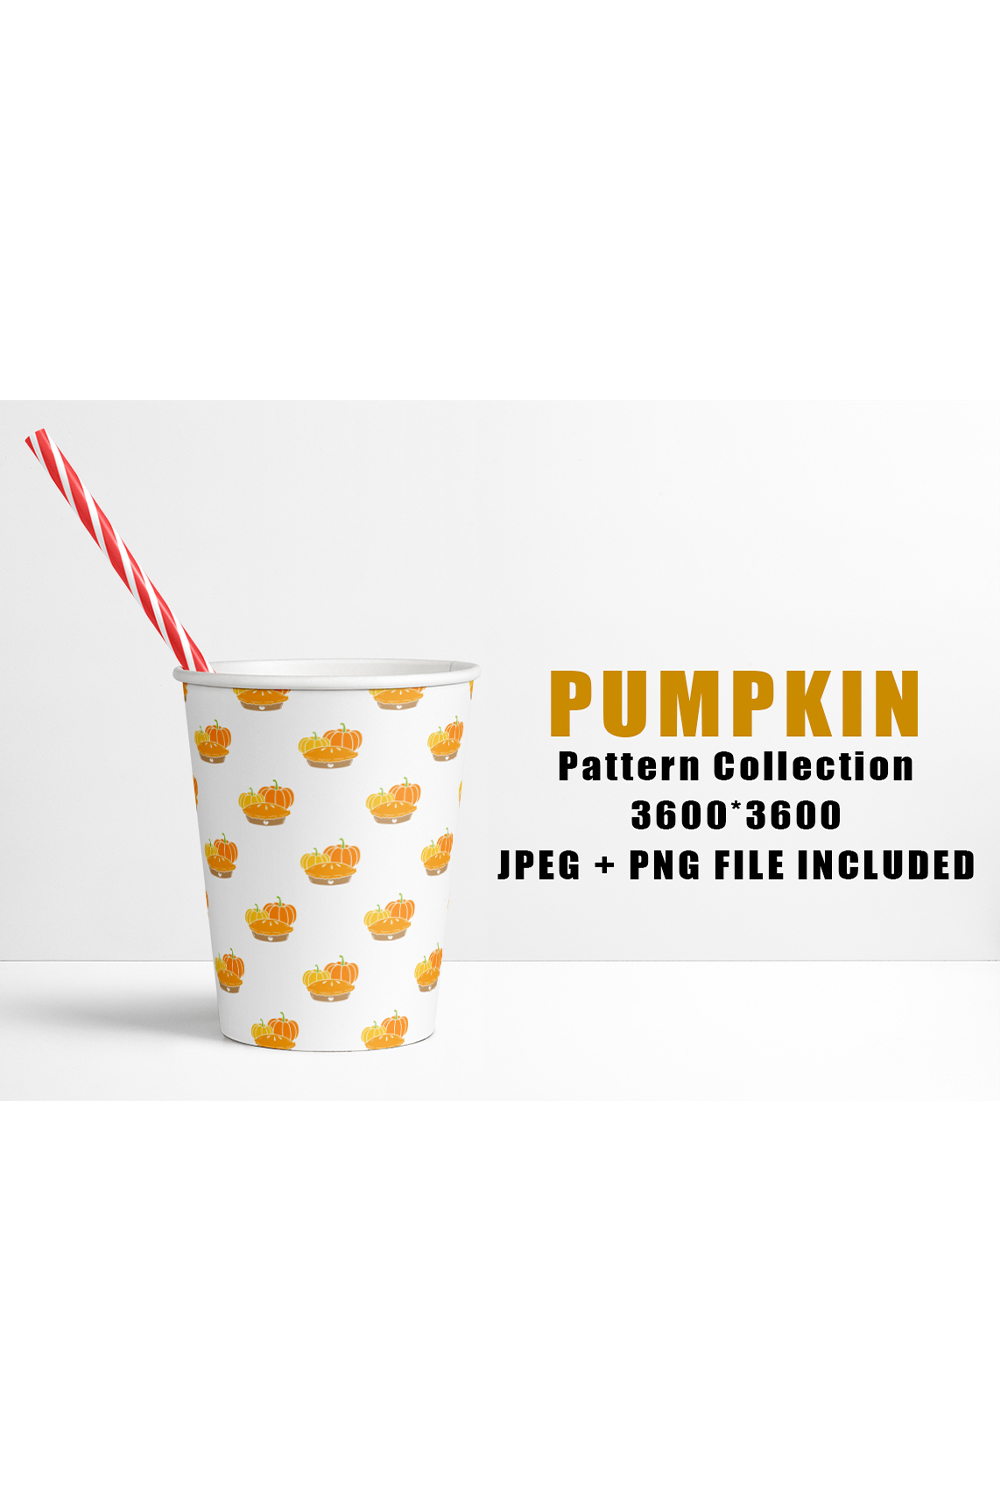 Image of a paper cup with gorgeous pumpkin patterns